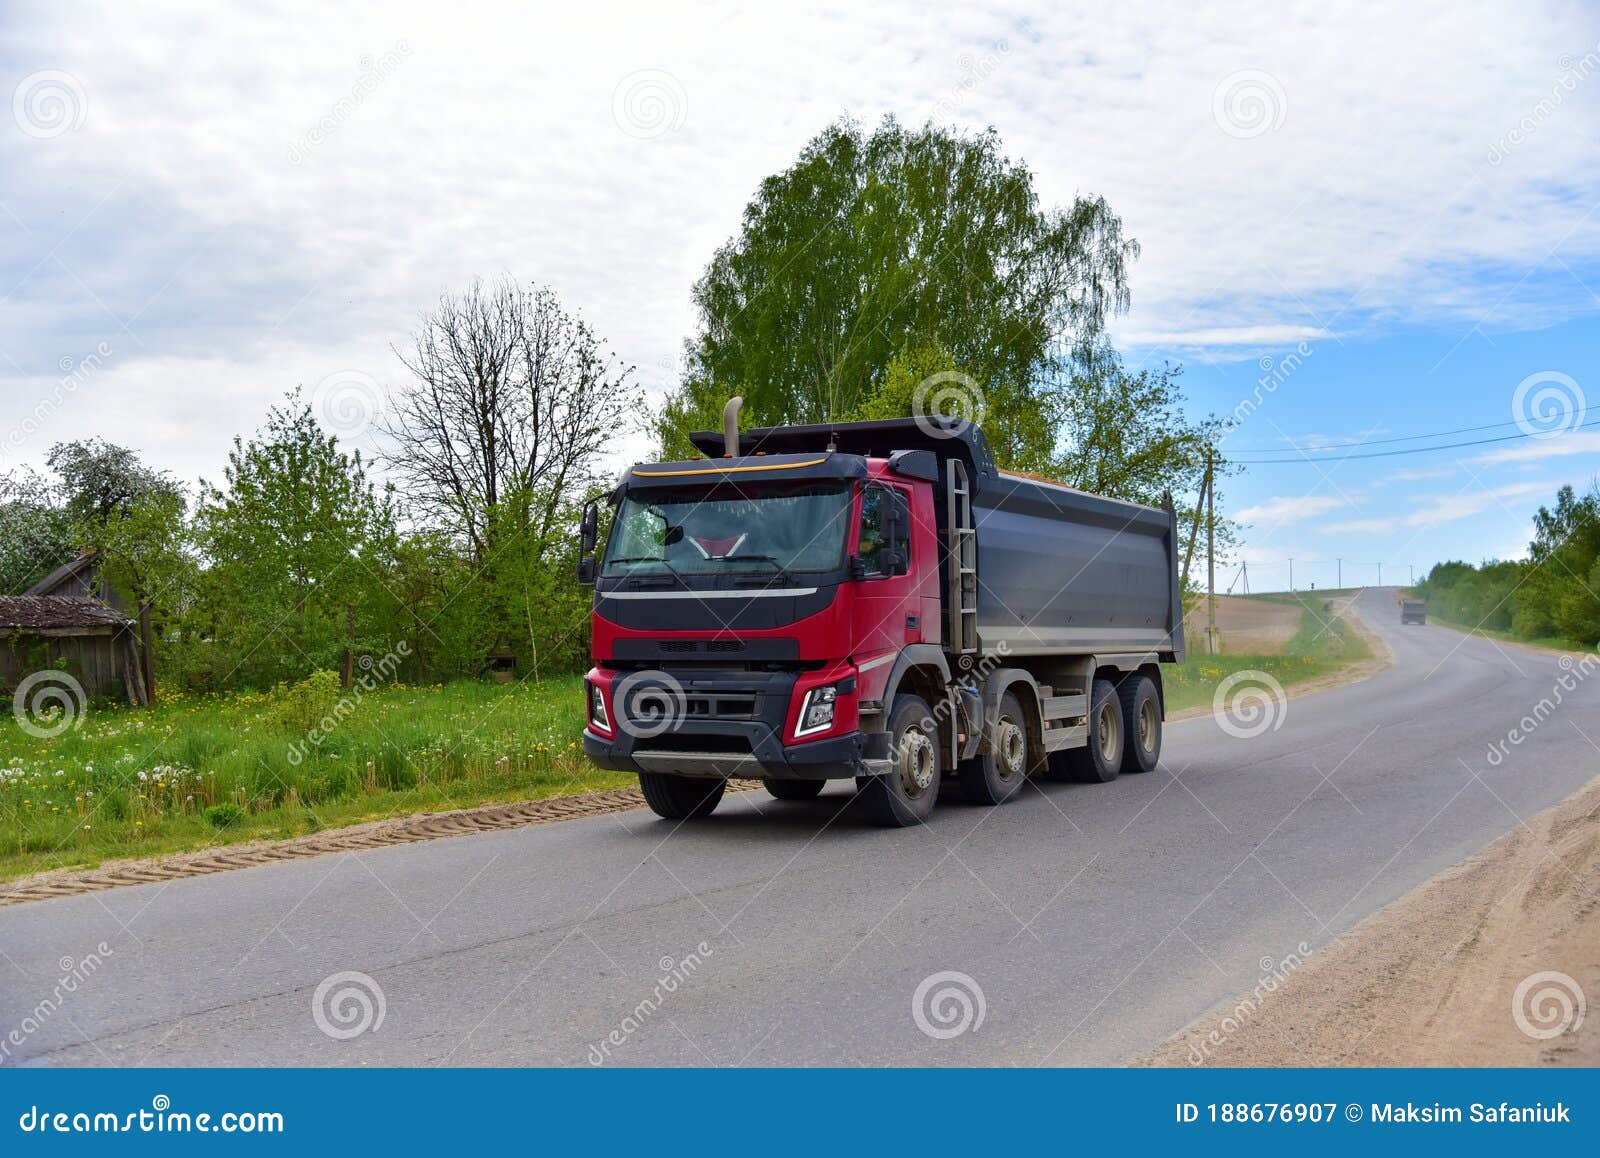 980 Modern Dump Truck Photos Free Royalty Free Stock Photos From Dreamstime